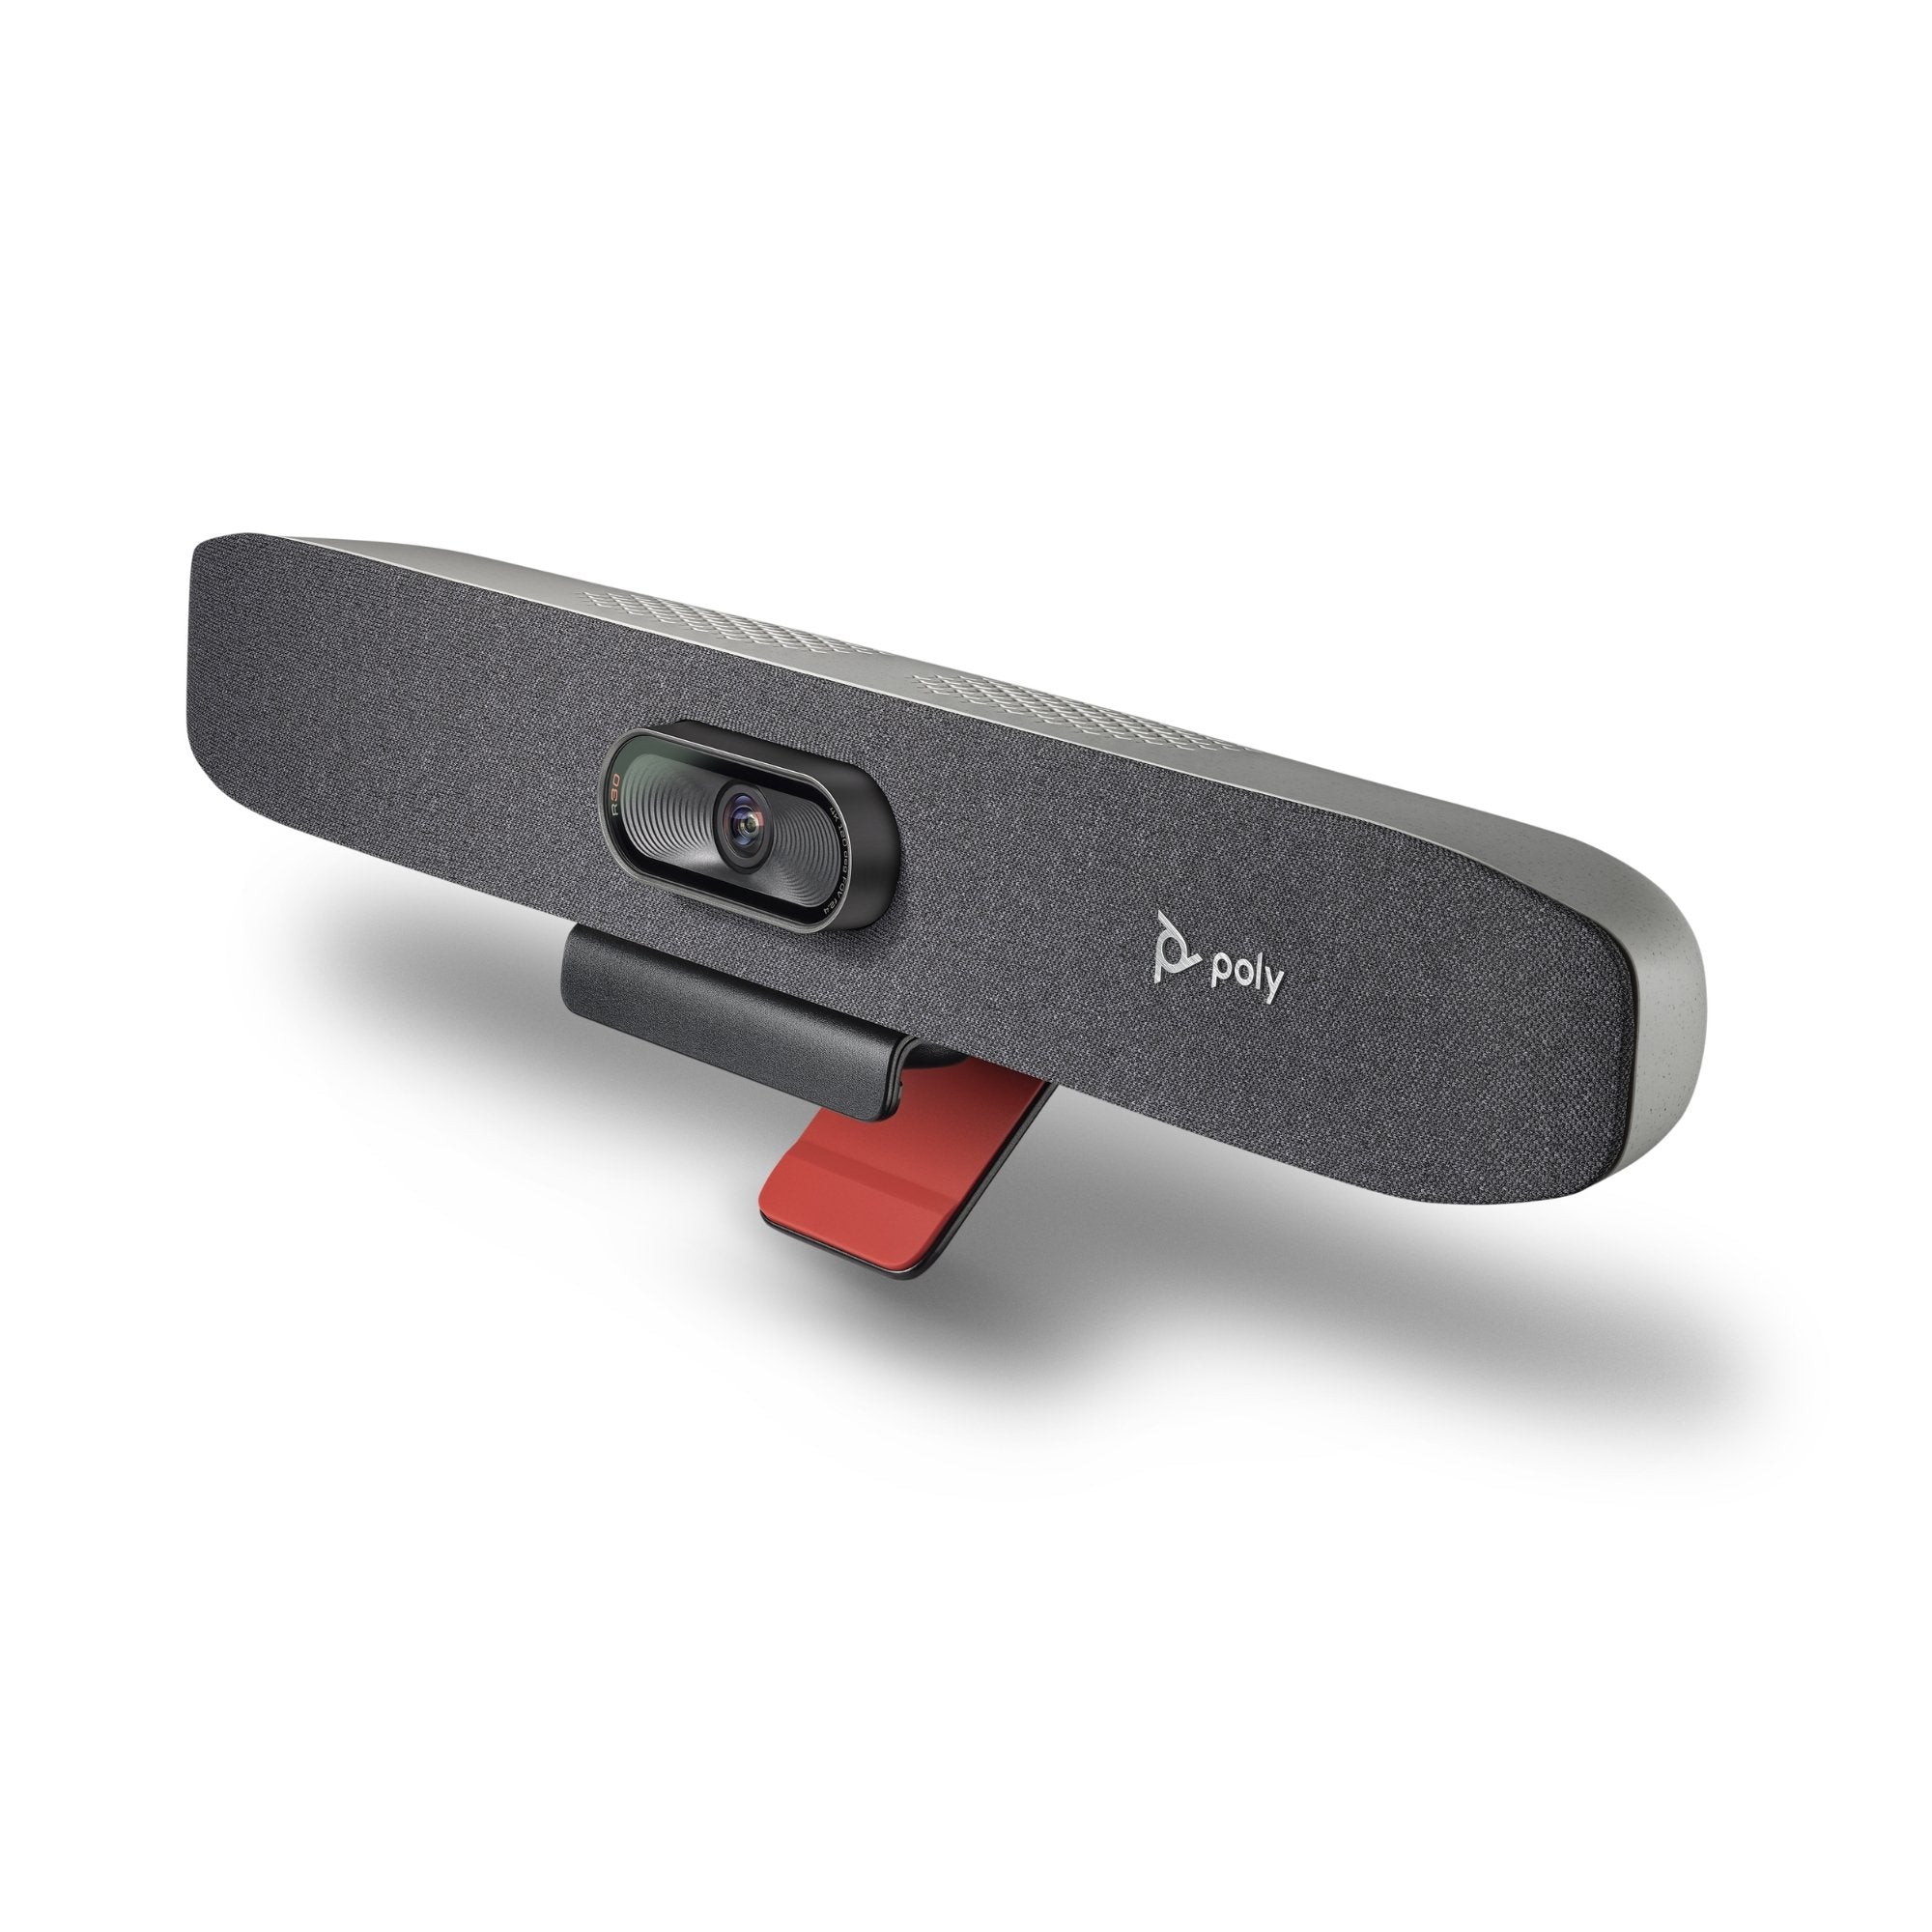 Poly Studio R30 Video Bar For Conference Rooms - Headset Advisor